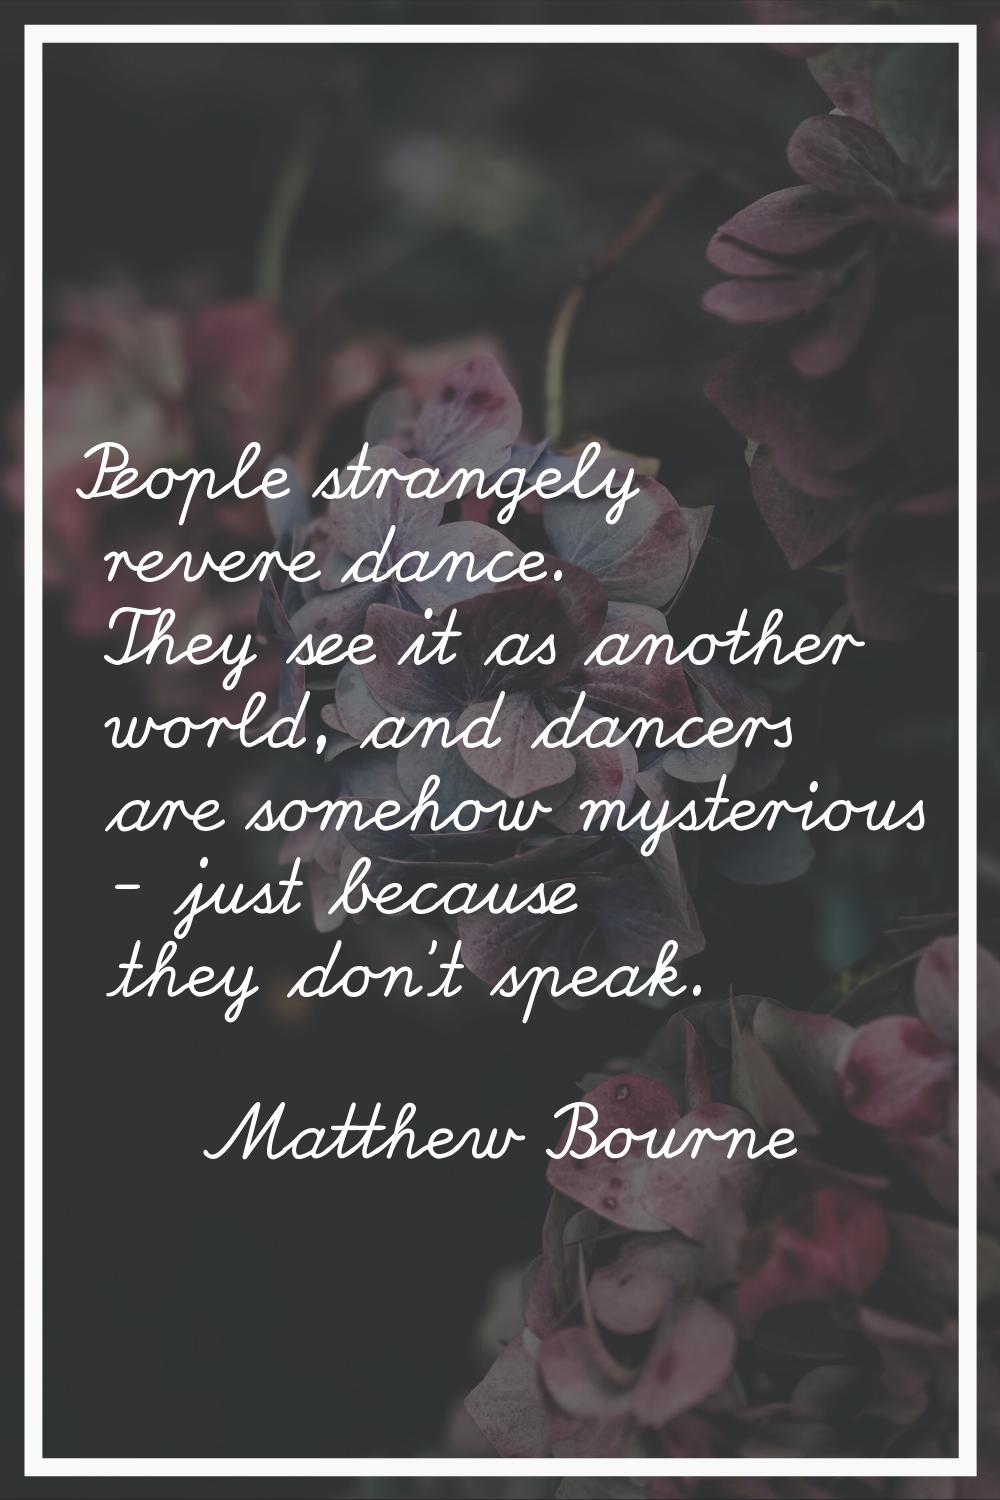 People strangely revere dance. They see it as another world, and dancers are somehow mysterious - j